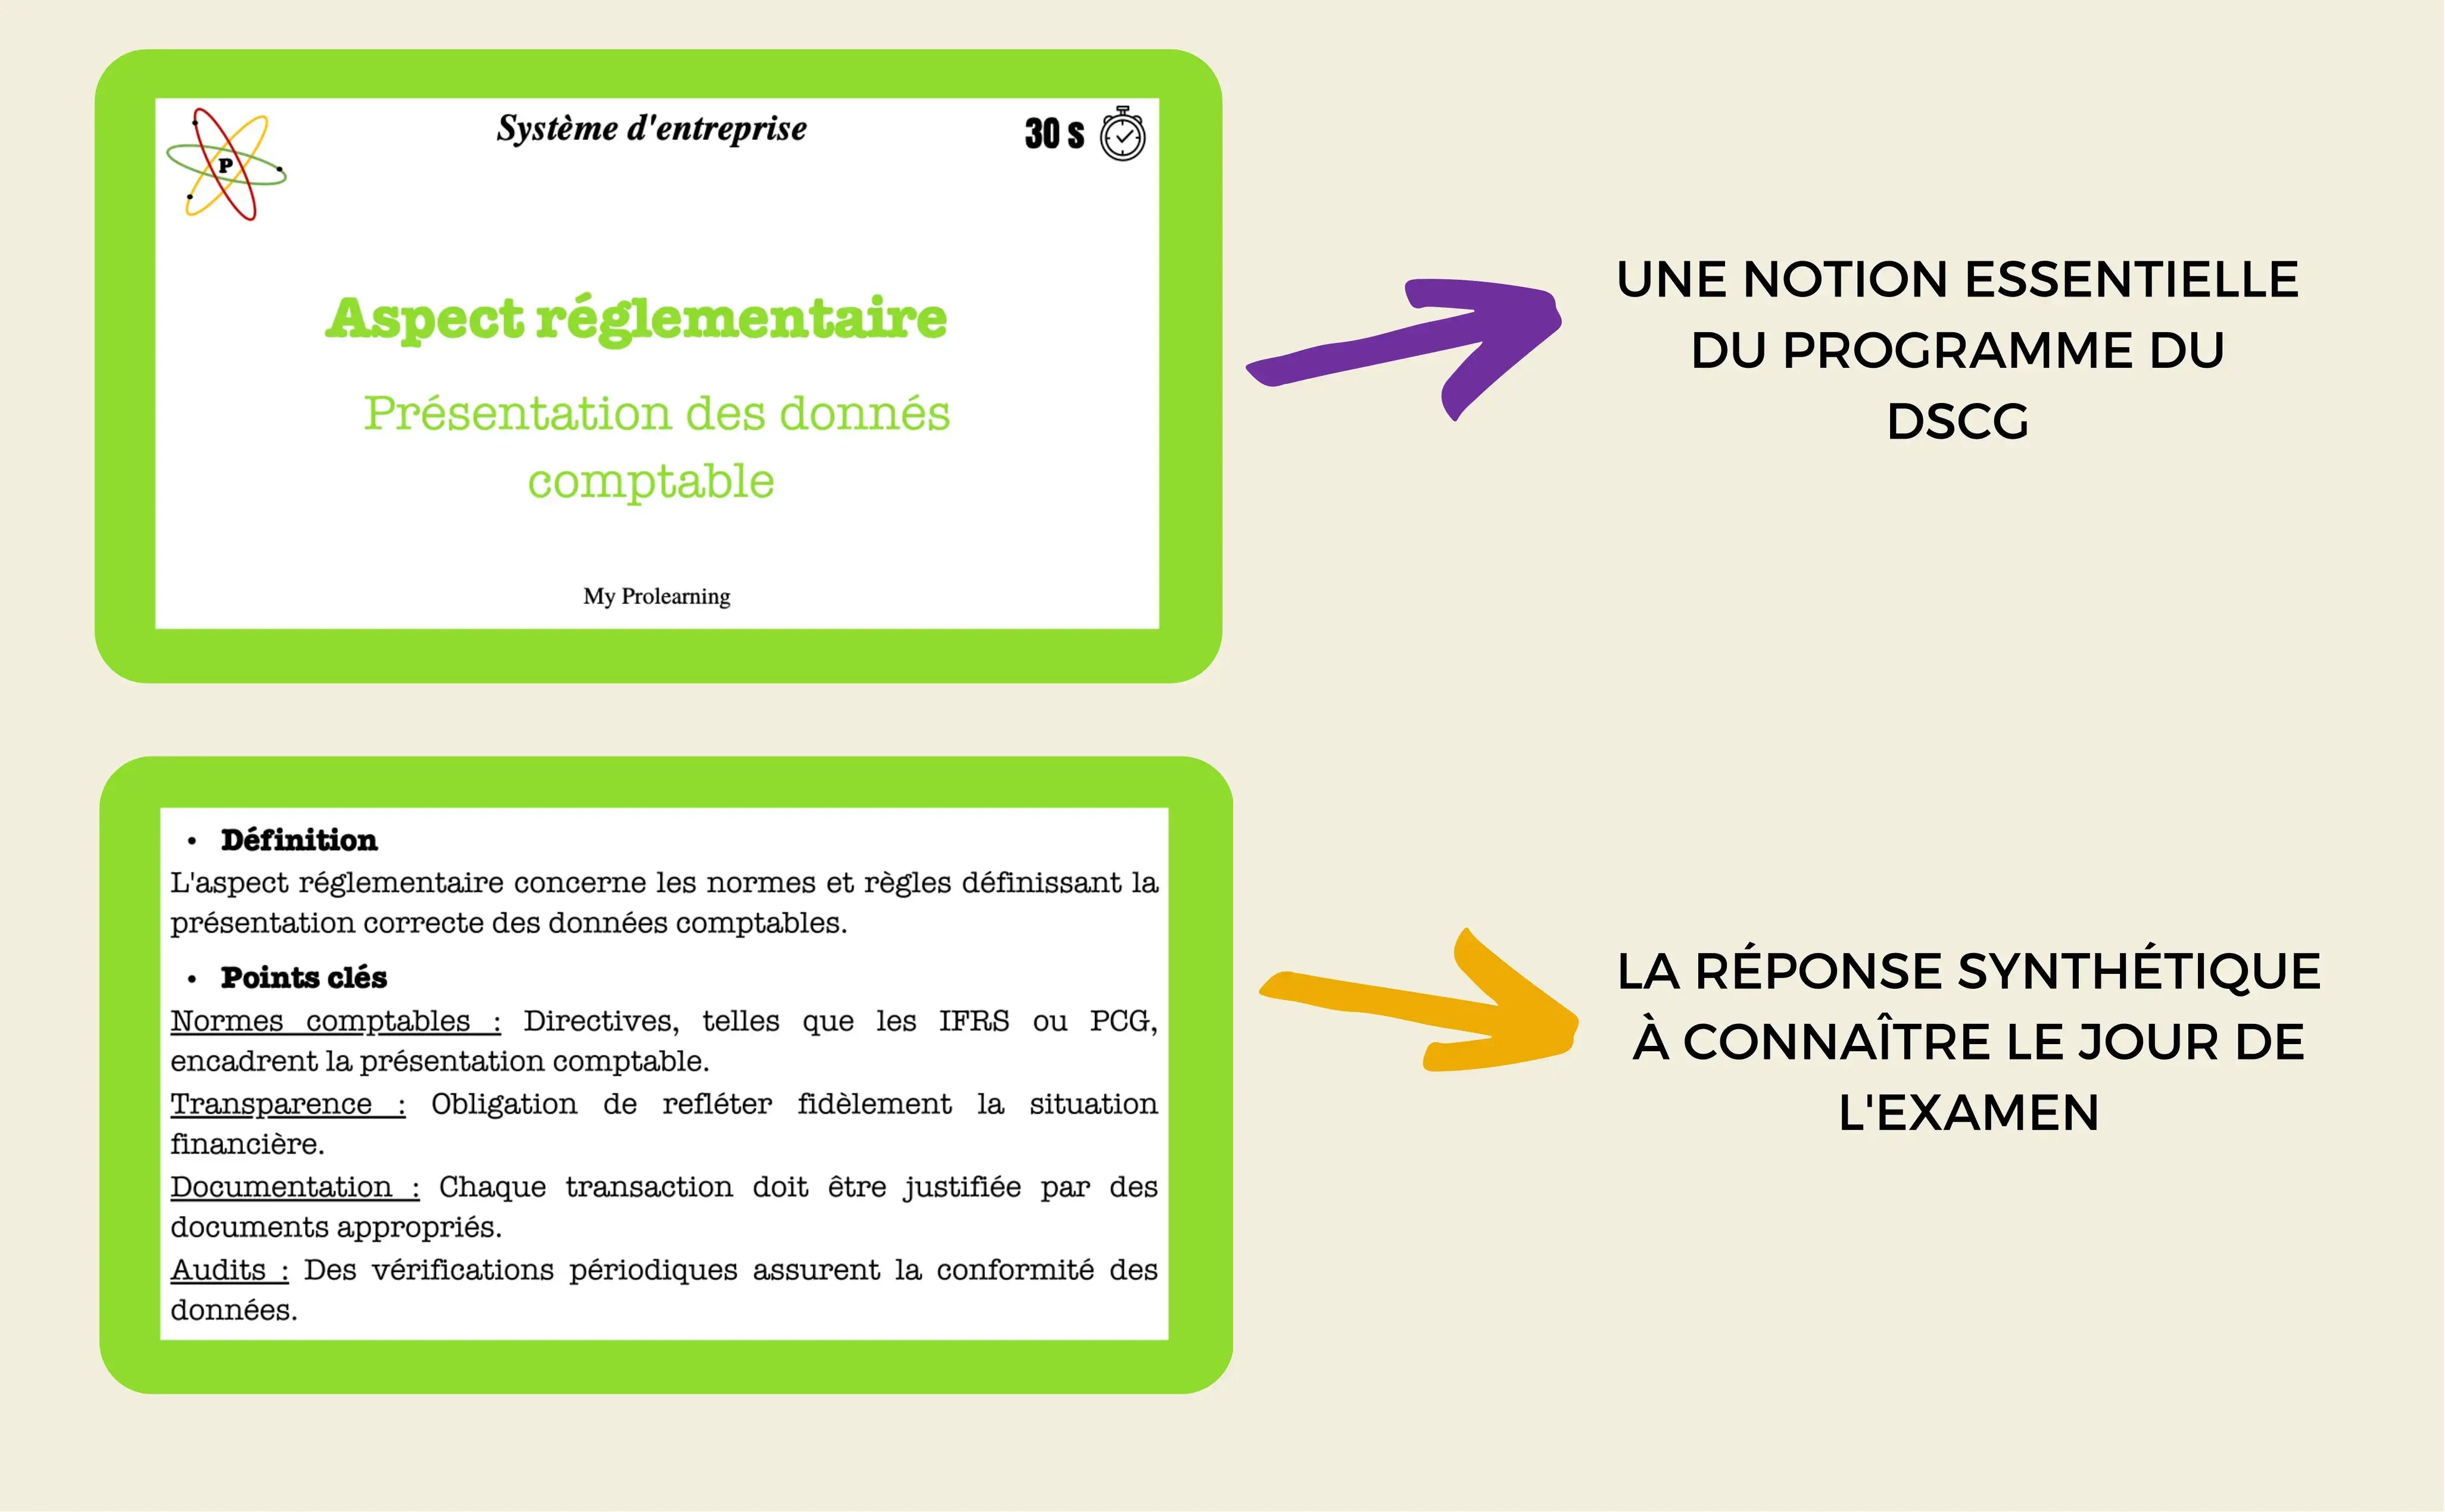 FICHES SYSTEMES D'ENTREPRISE - My Prolearning 